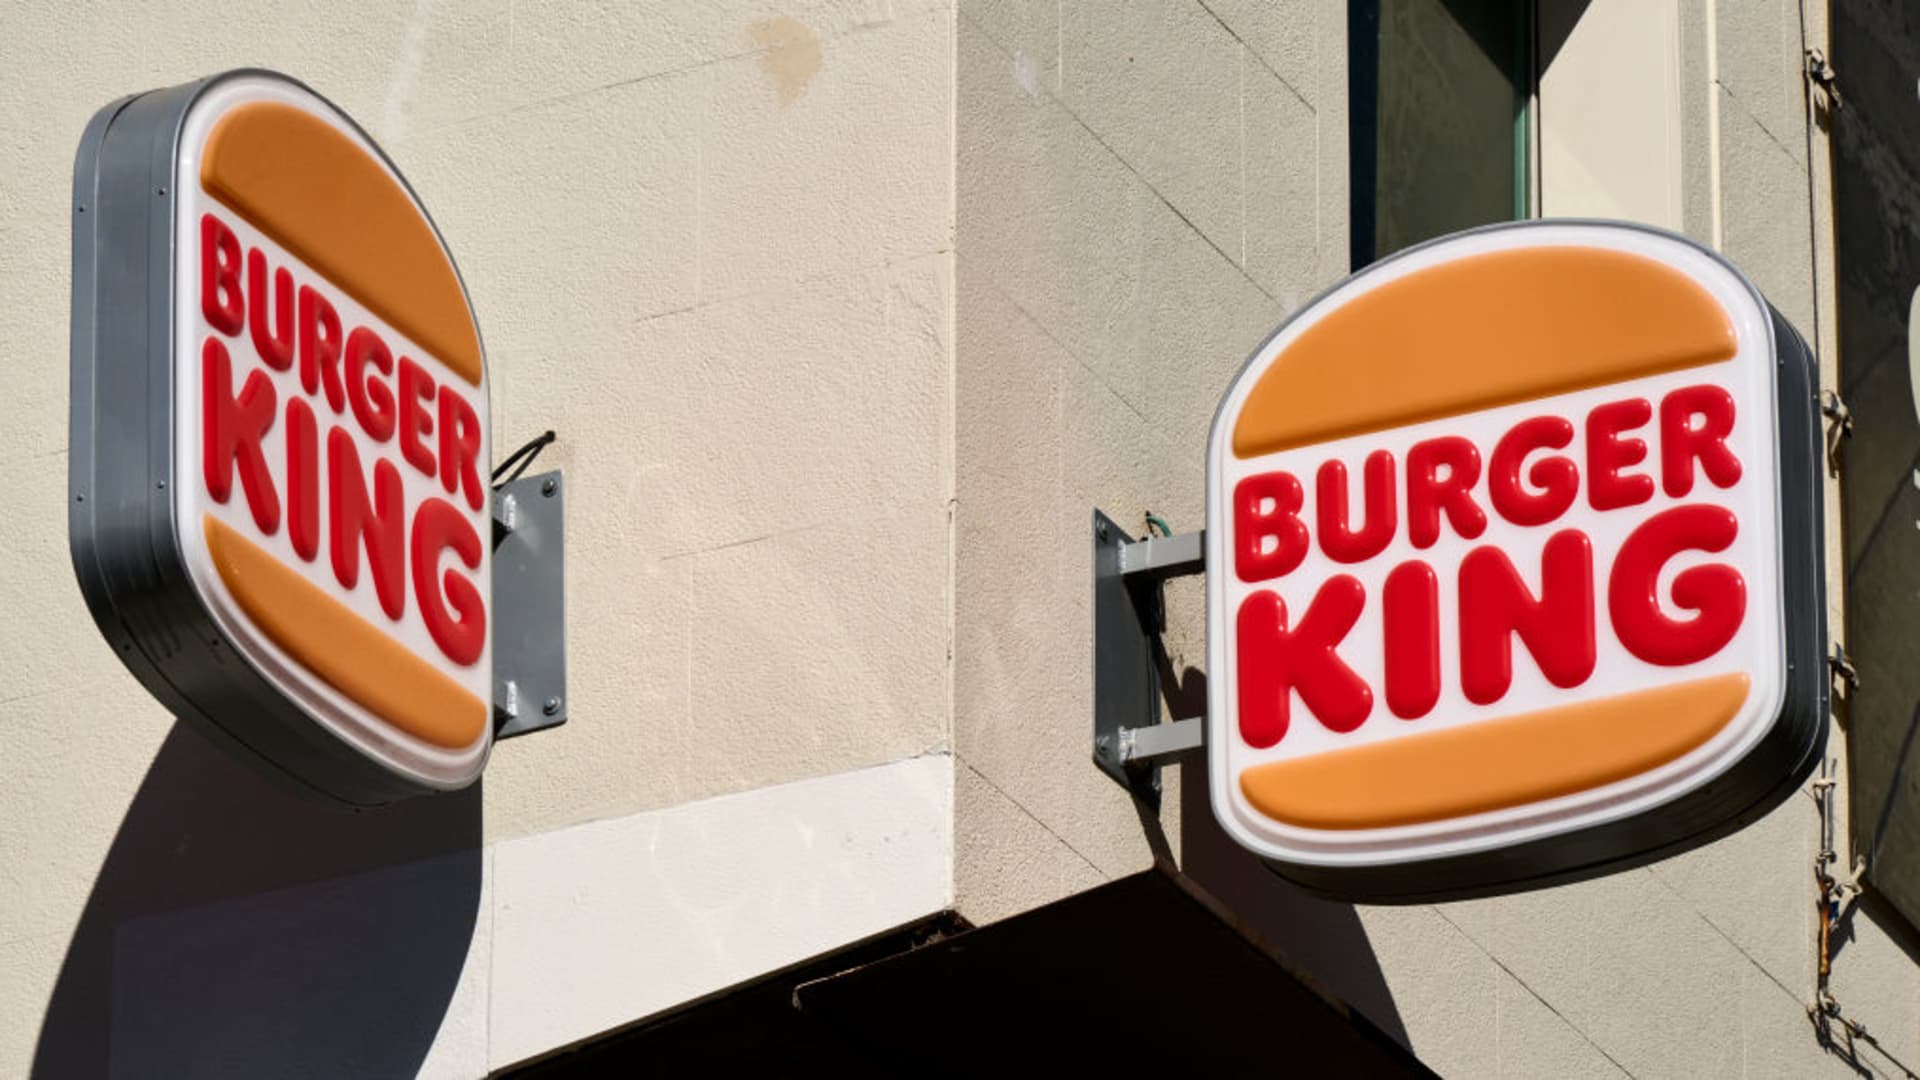 Burger King $400 million plan to revive U.S. sales with remodels, advertising